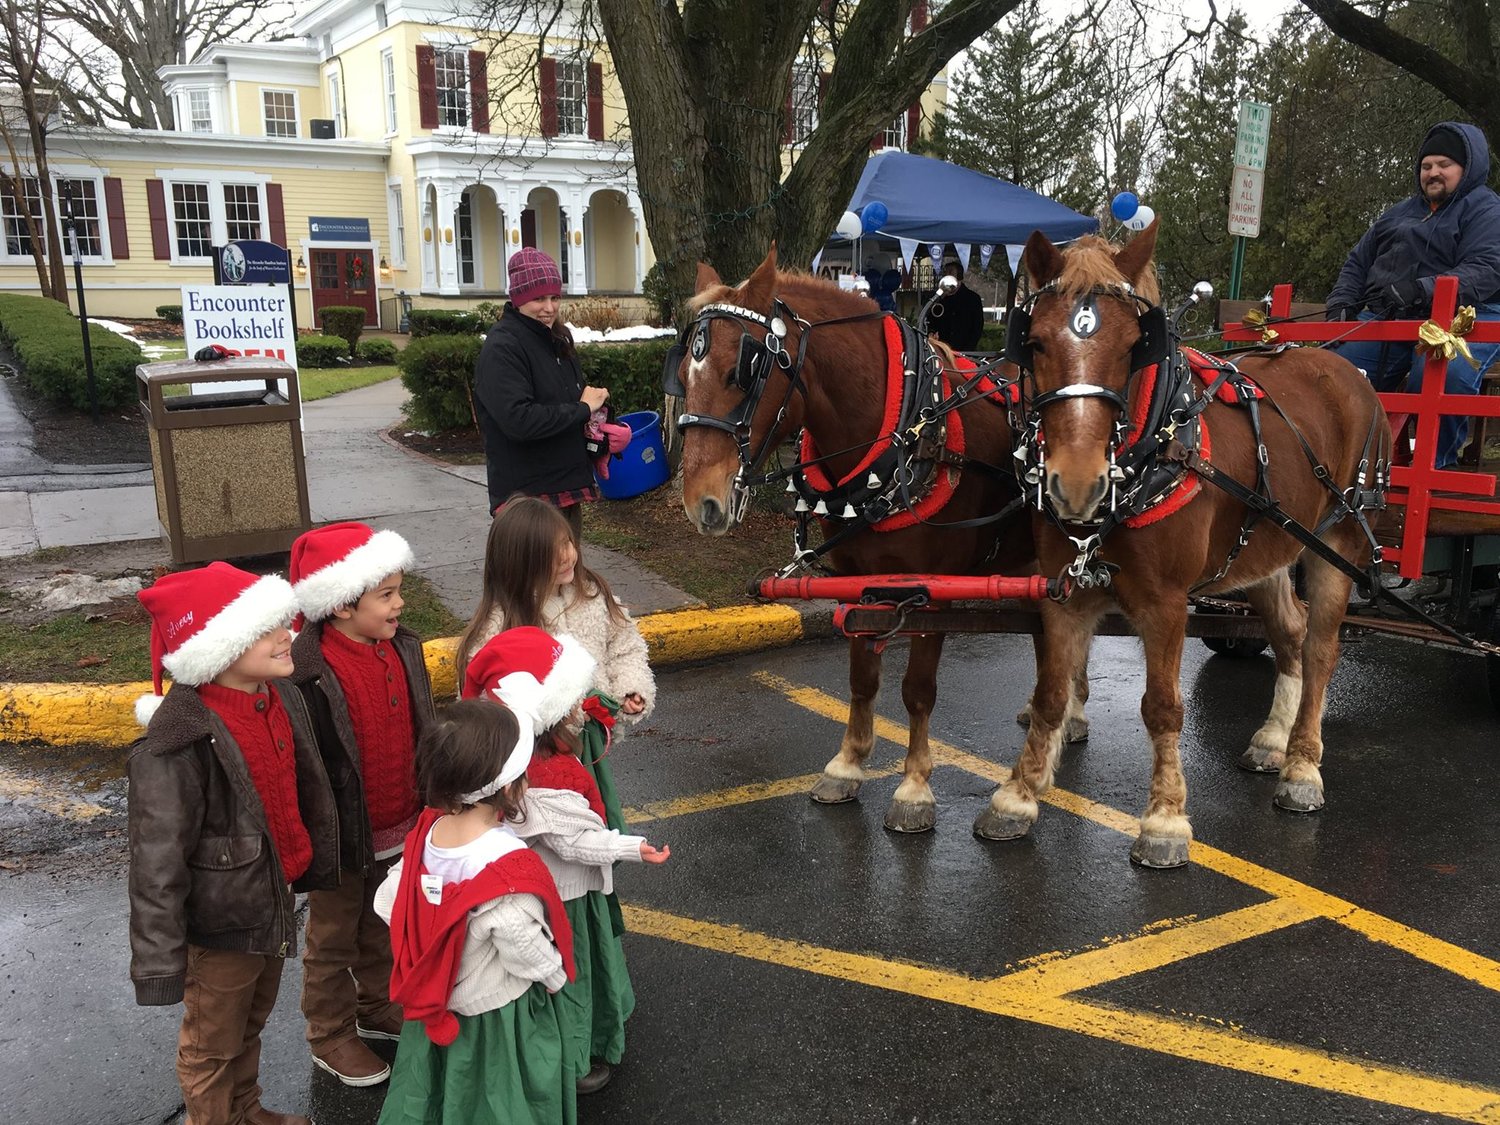 The Clinton Chamber of Commerce’s annual Holiday Shoppers Stroll will take place Friday and Saturday, Nov. 25-26, throughout the village of Clinton.